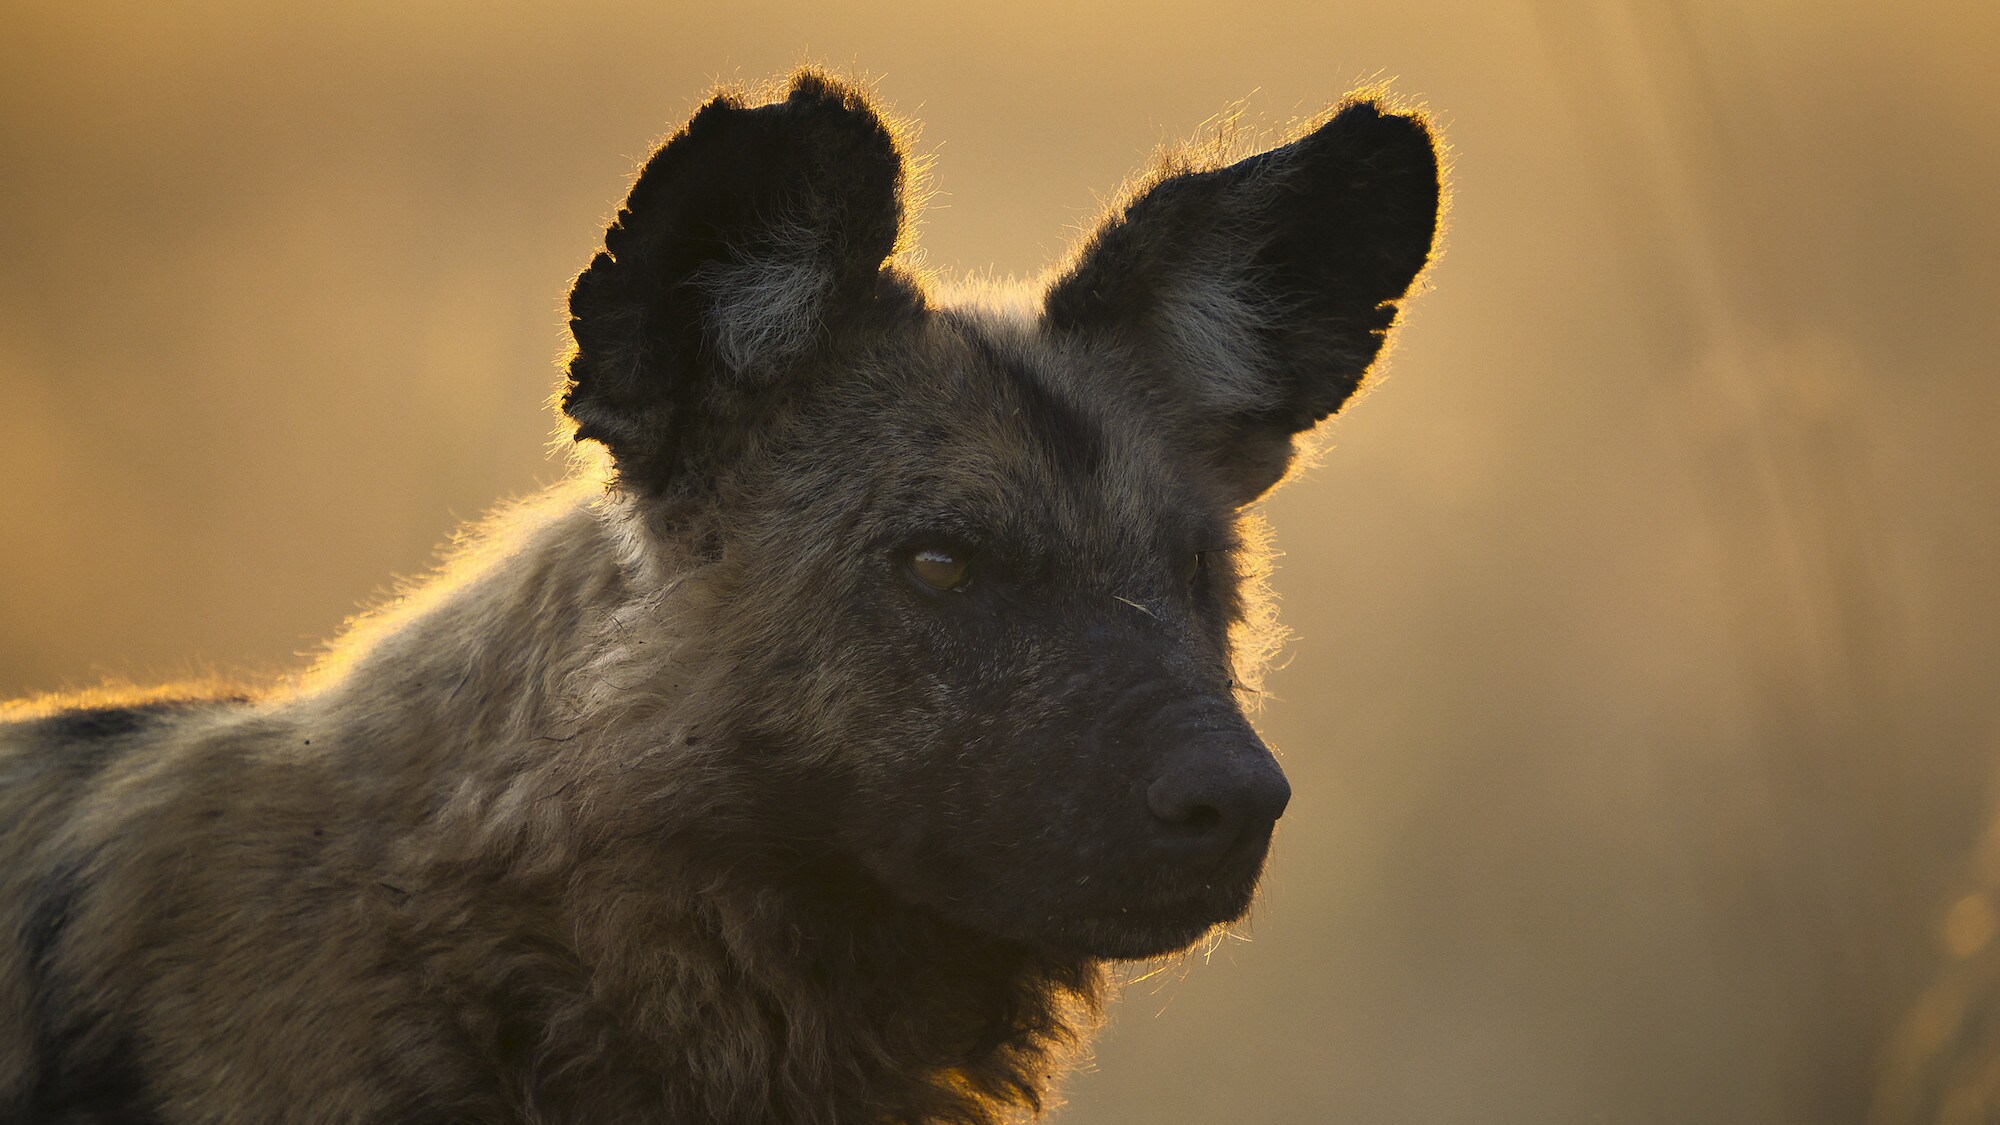 Wild dog looking past the camera in dusky light. (National Geographic for Disney+/Sam Stewart)